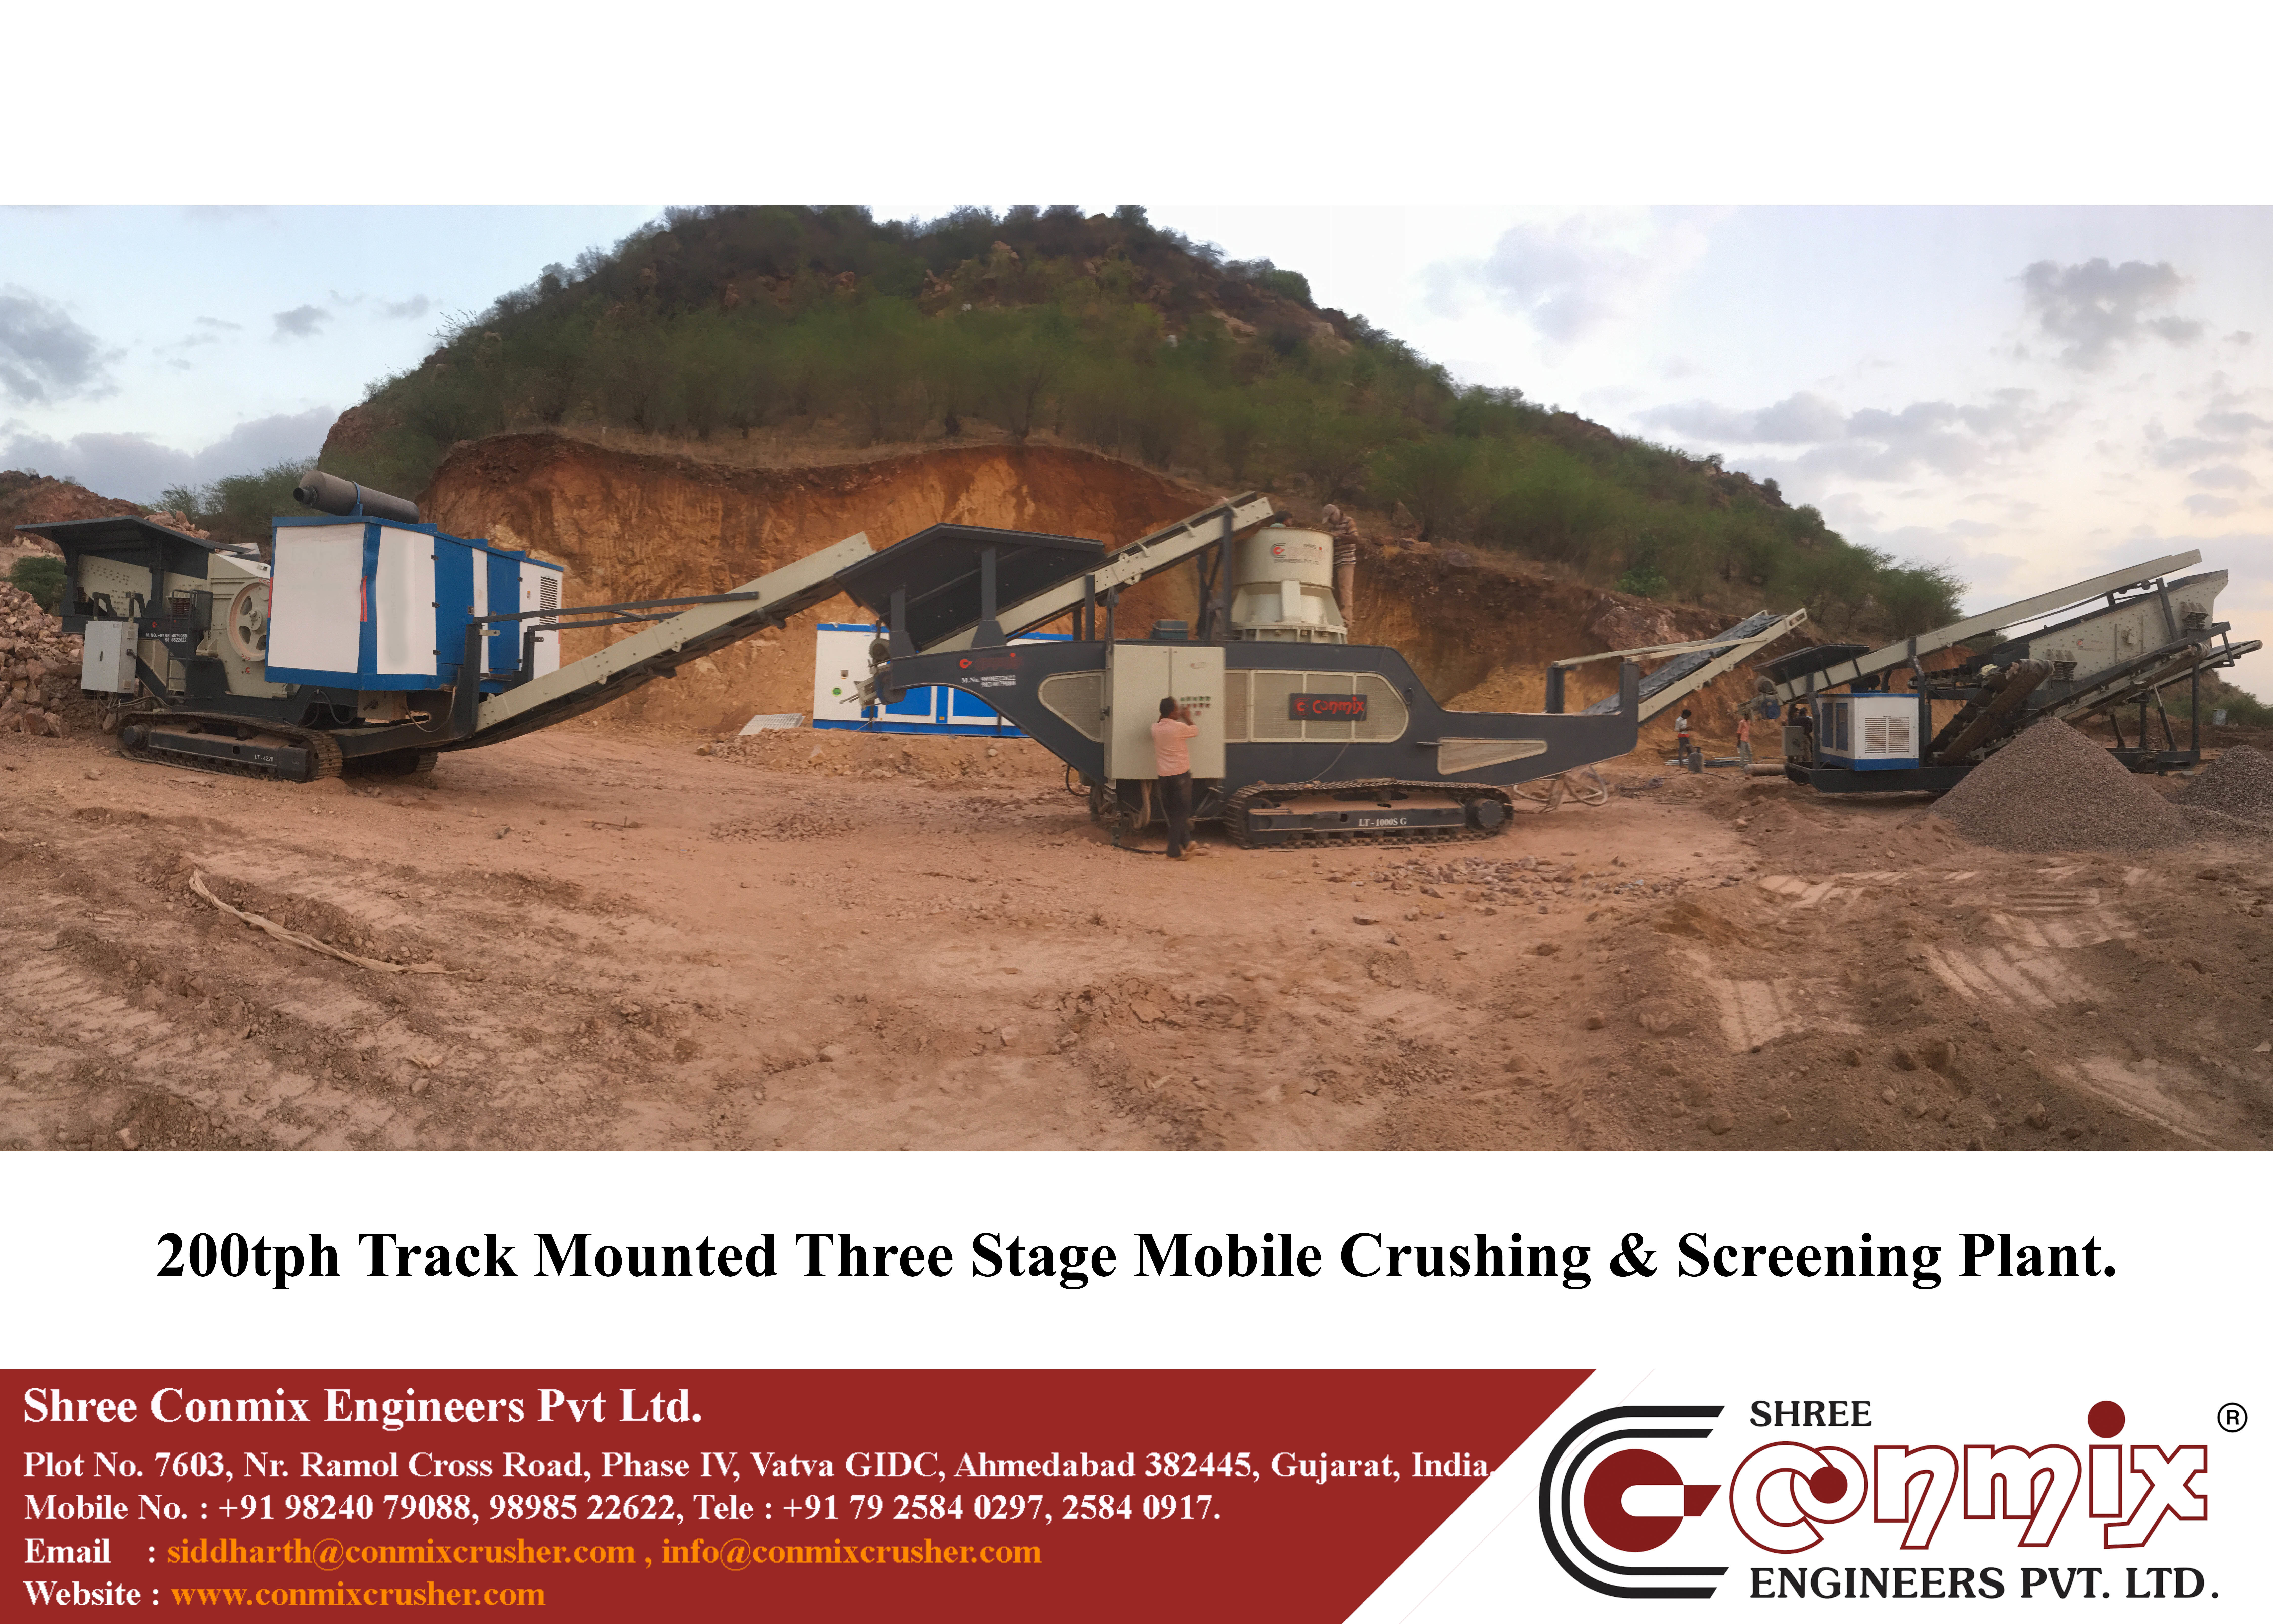 Track Mounted Mobile Cone Crusher